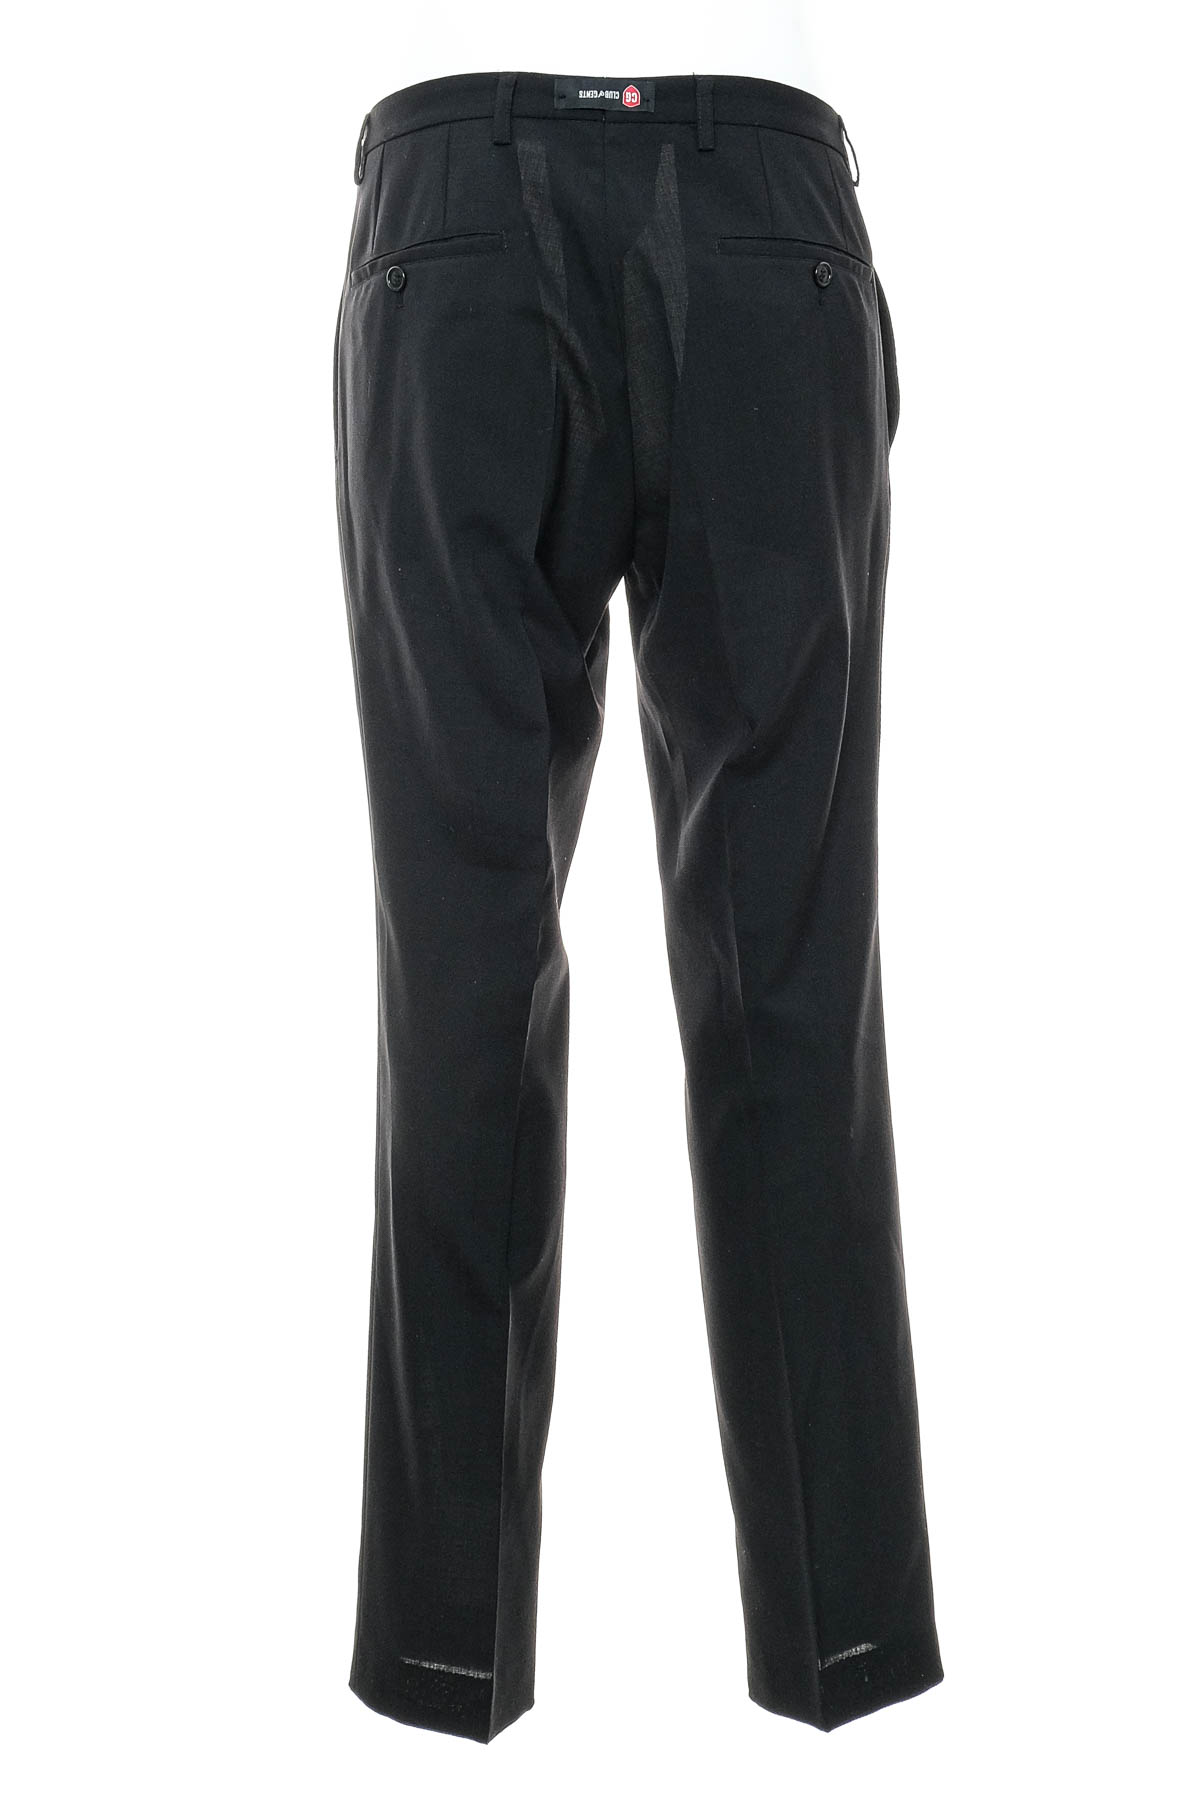 Men's trousers - Club of Gents - 1